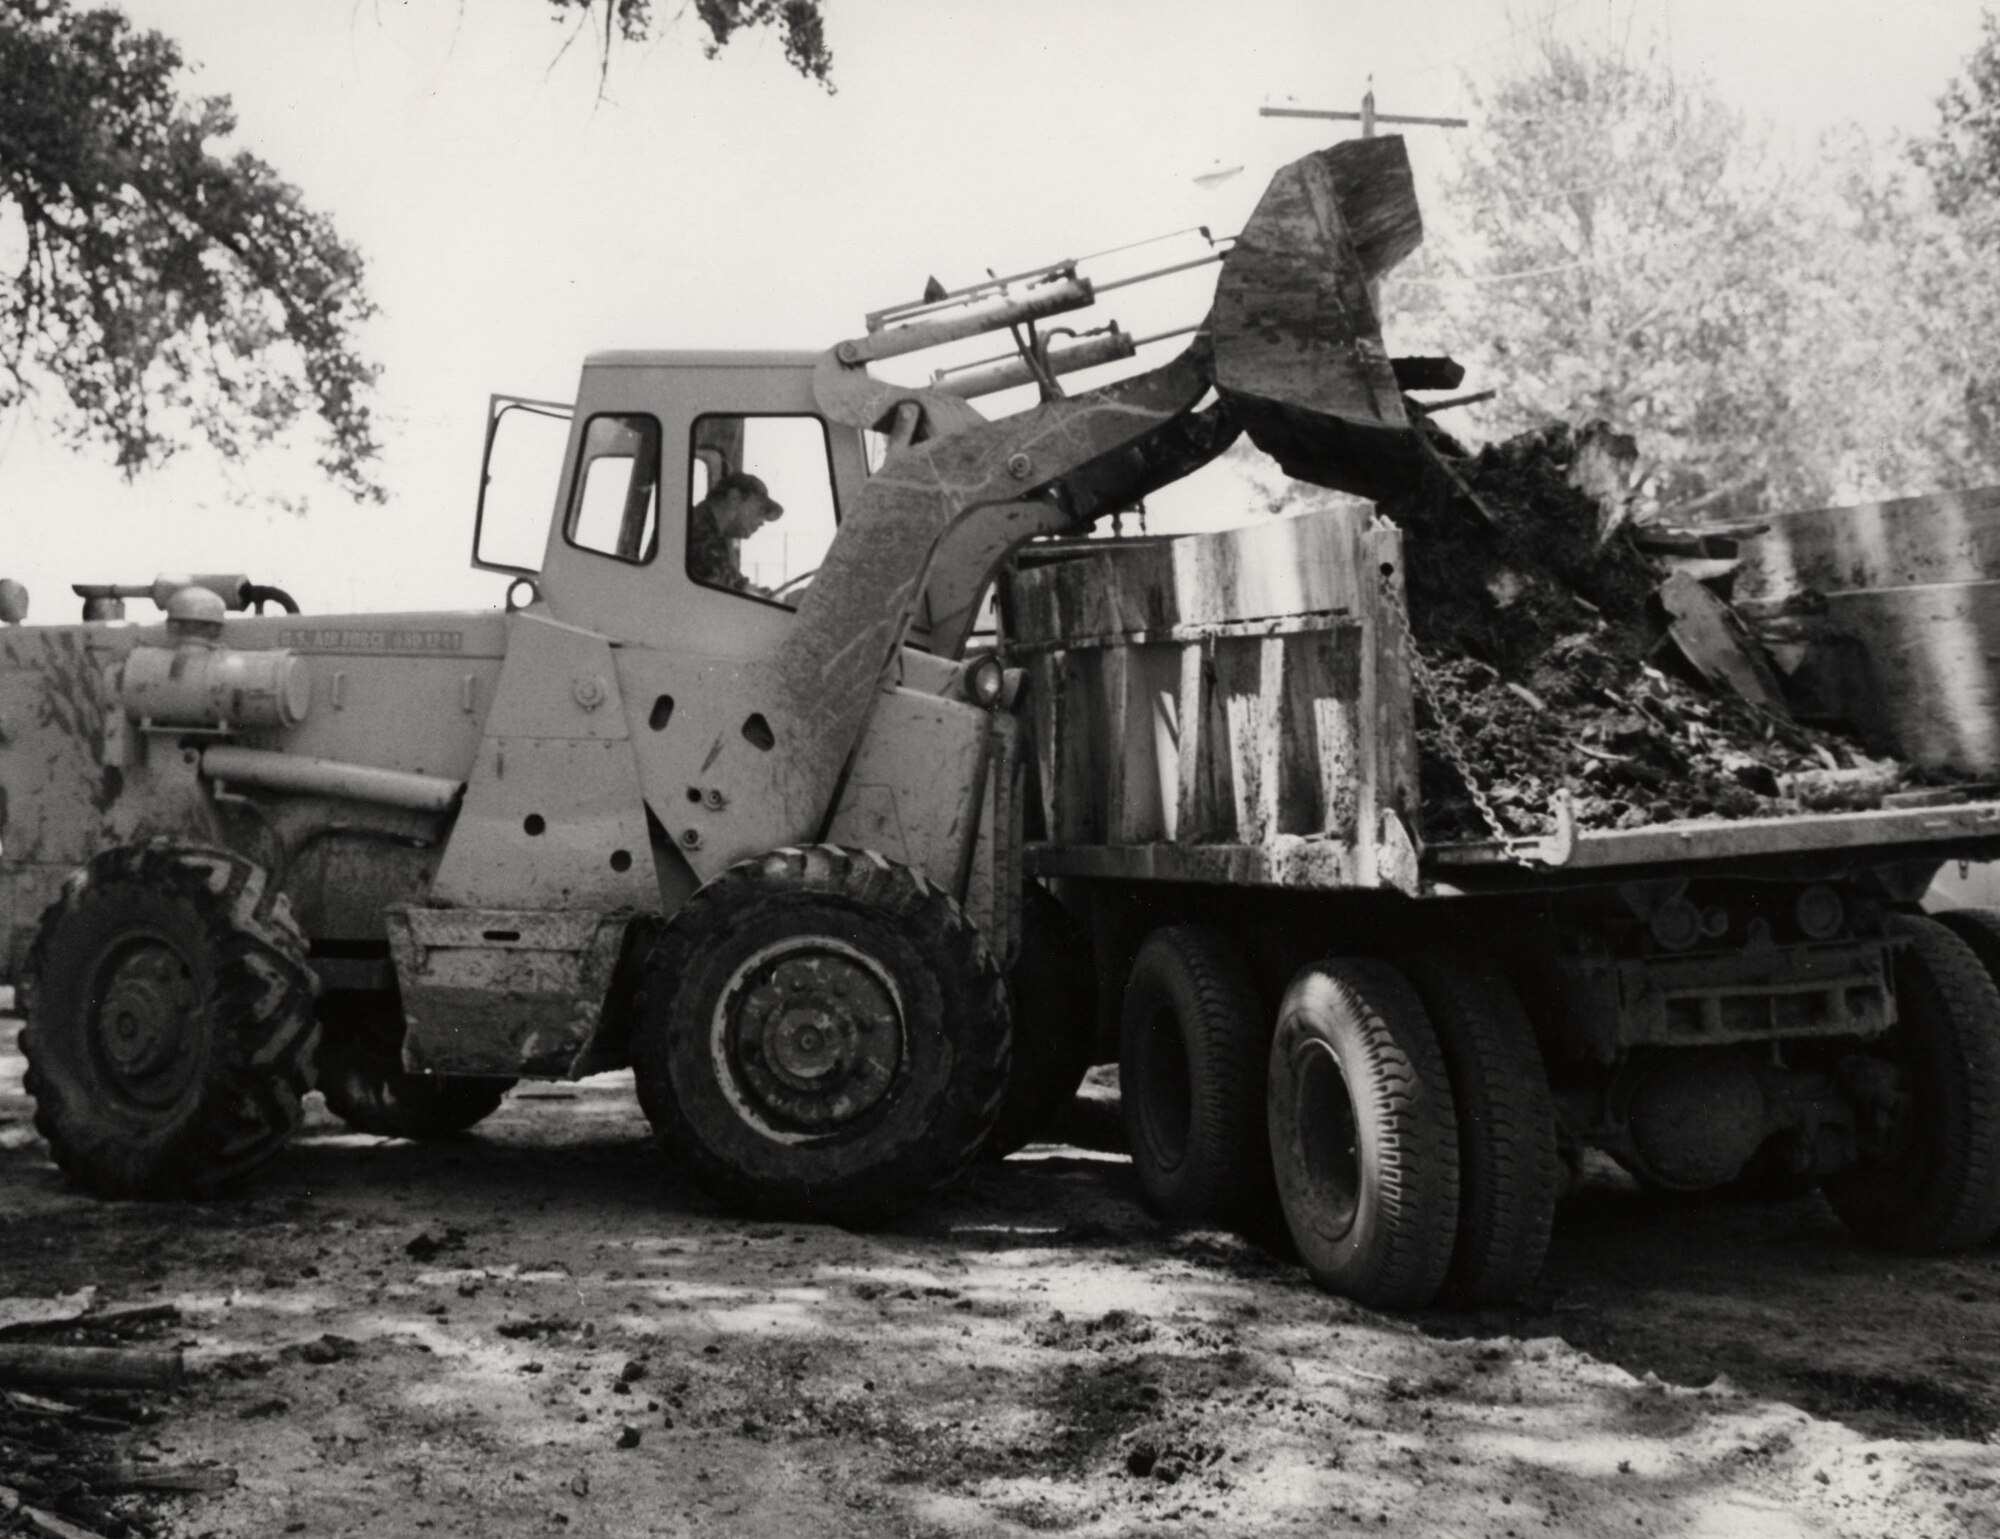 An Ellsworth Airman uses a front end loader to pick up debris around homes and nearby buildings that were damaged after the flood in Rapid City, S.D., June 1972. Nearly 500 Ellsworth Airmen worked with local authorities on June 10, 1972, a number that increased to 1,143 on June 11 and 950 on June 12. Massive amounts of heavy equipment, medical supplies, food and water were dispersed to stricken areas. (U.S. Air Force courtesy photo)